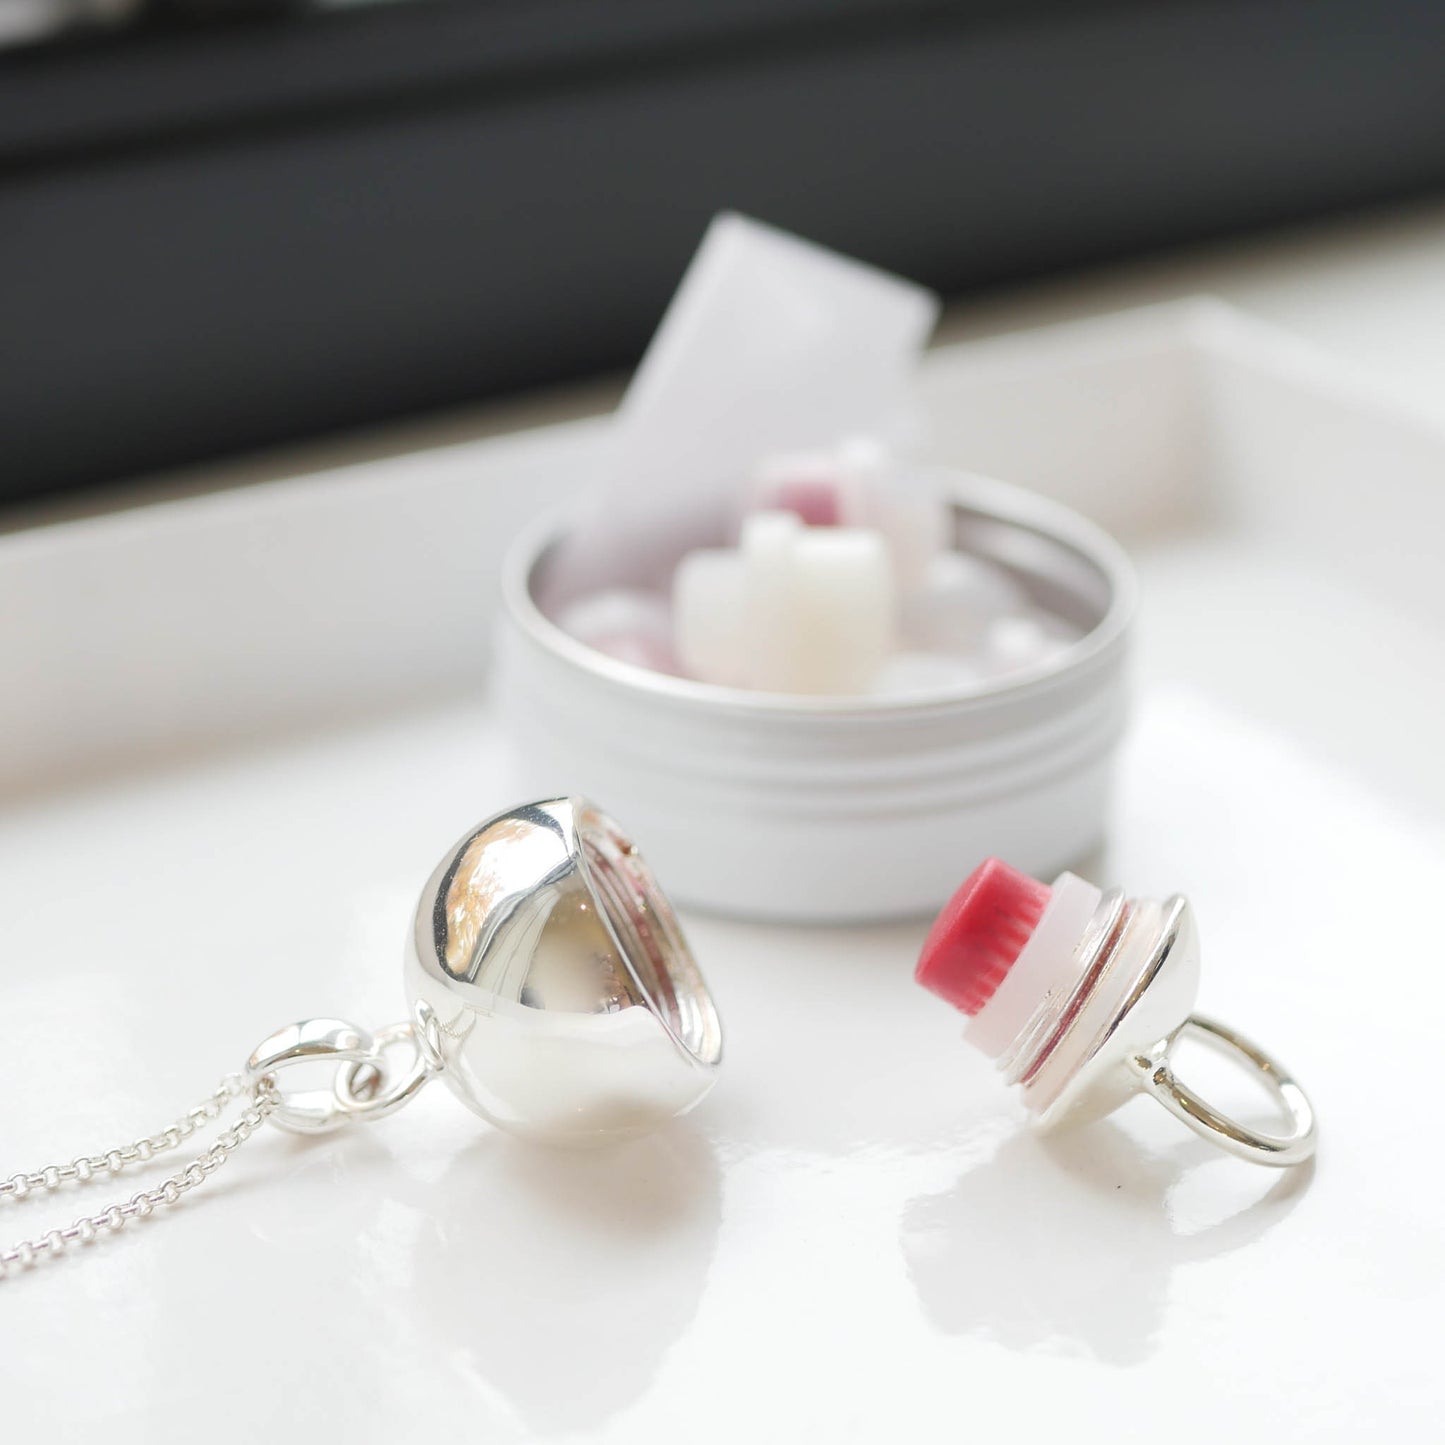 LiLu Lip Balm Necklace Kira Silver Plated with 8 Refills or DIY Refills - Use Your Balm